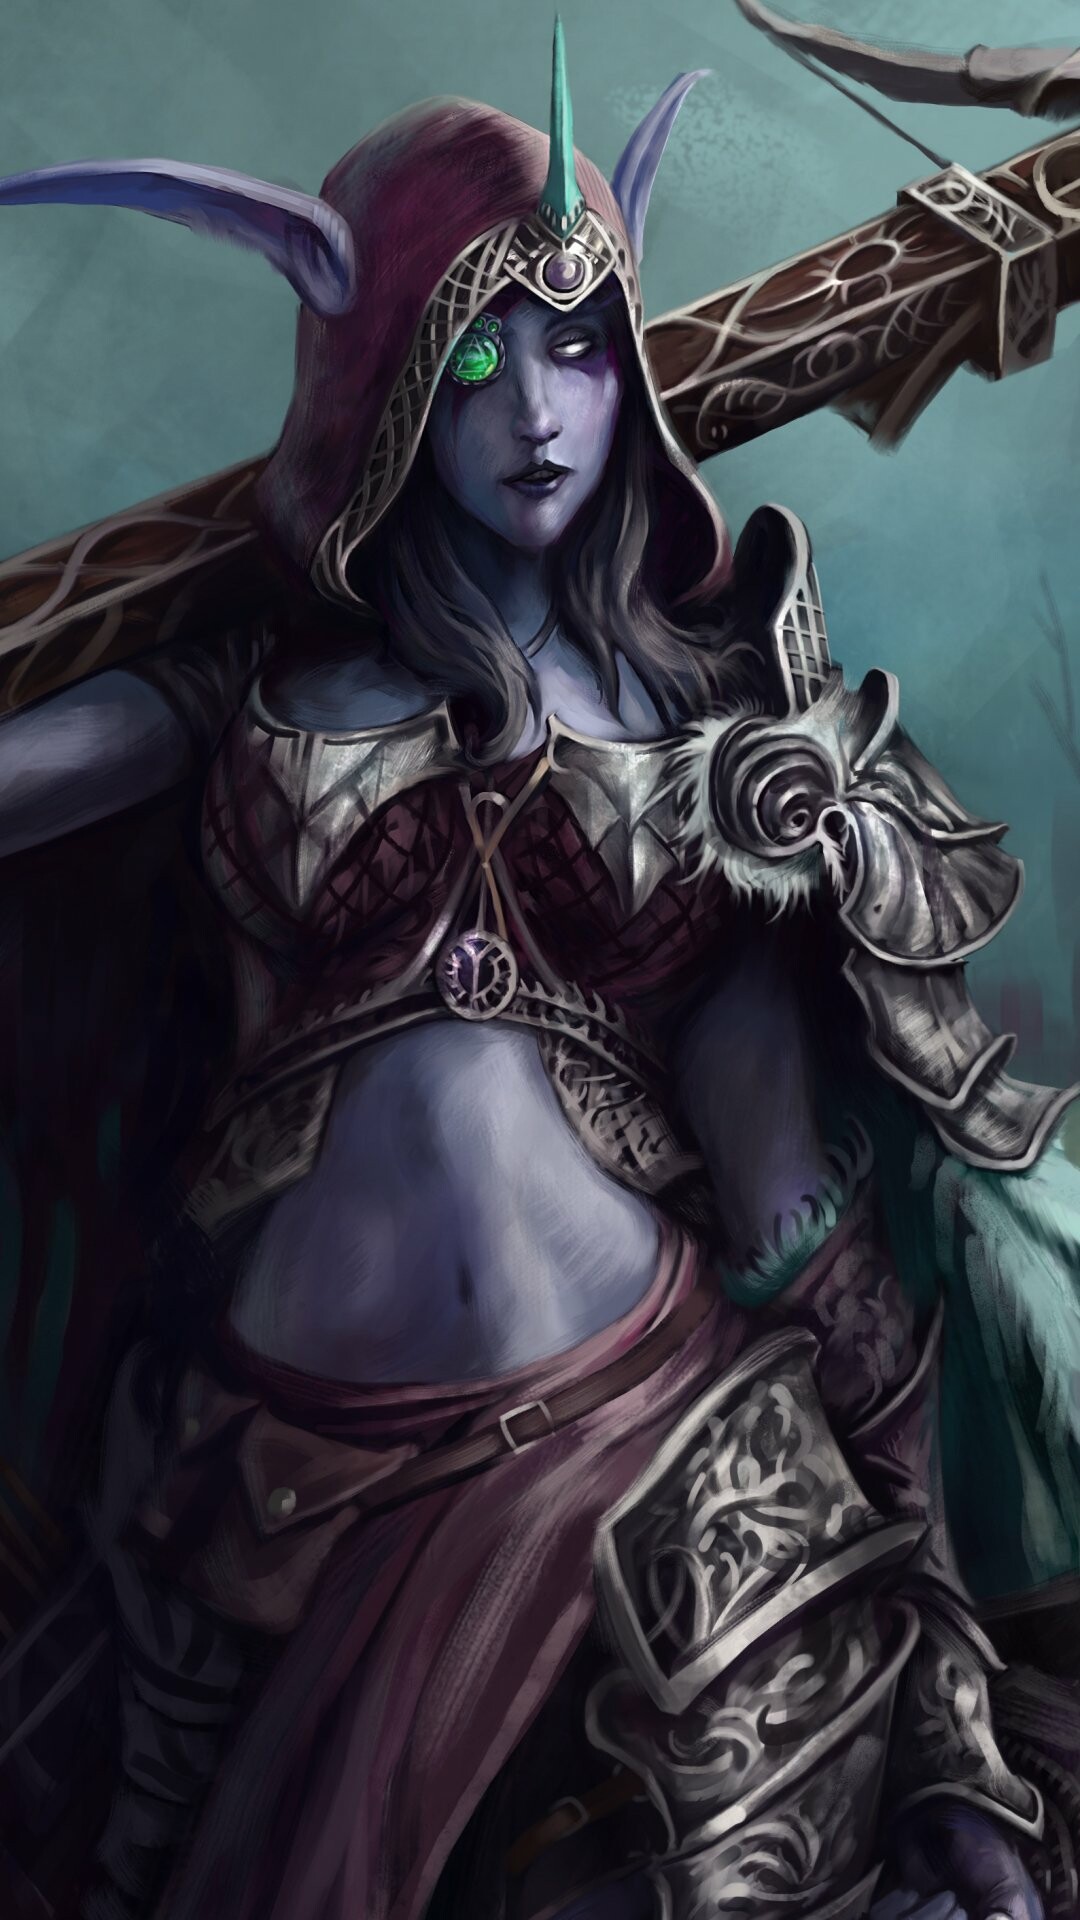 World of Warcraft: Video game, Sylvanas Windrunner, The Warchief of the Horde. 1080x1920 Full HD Background.